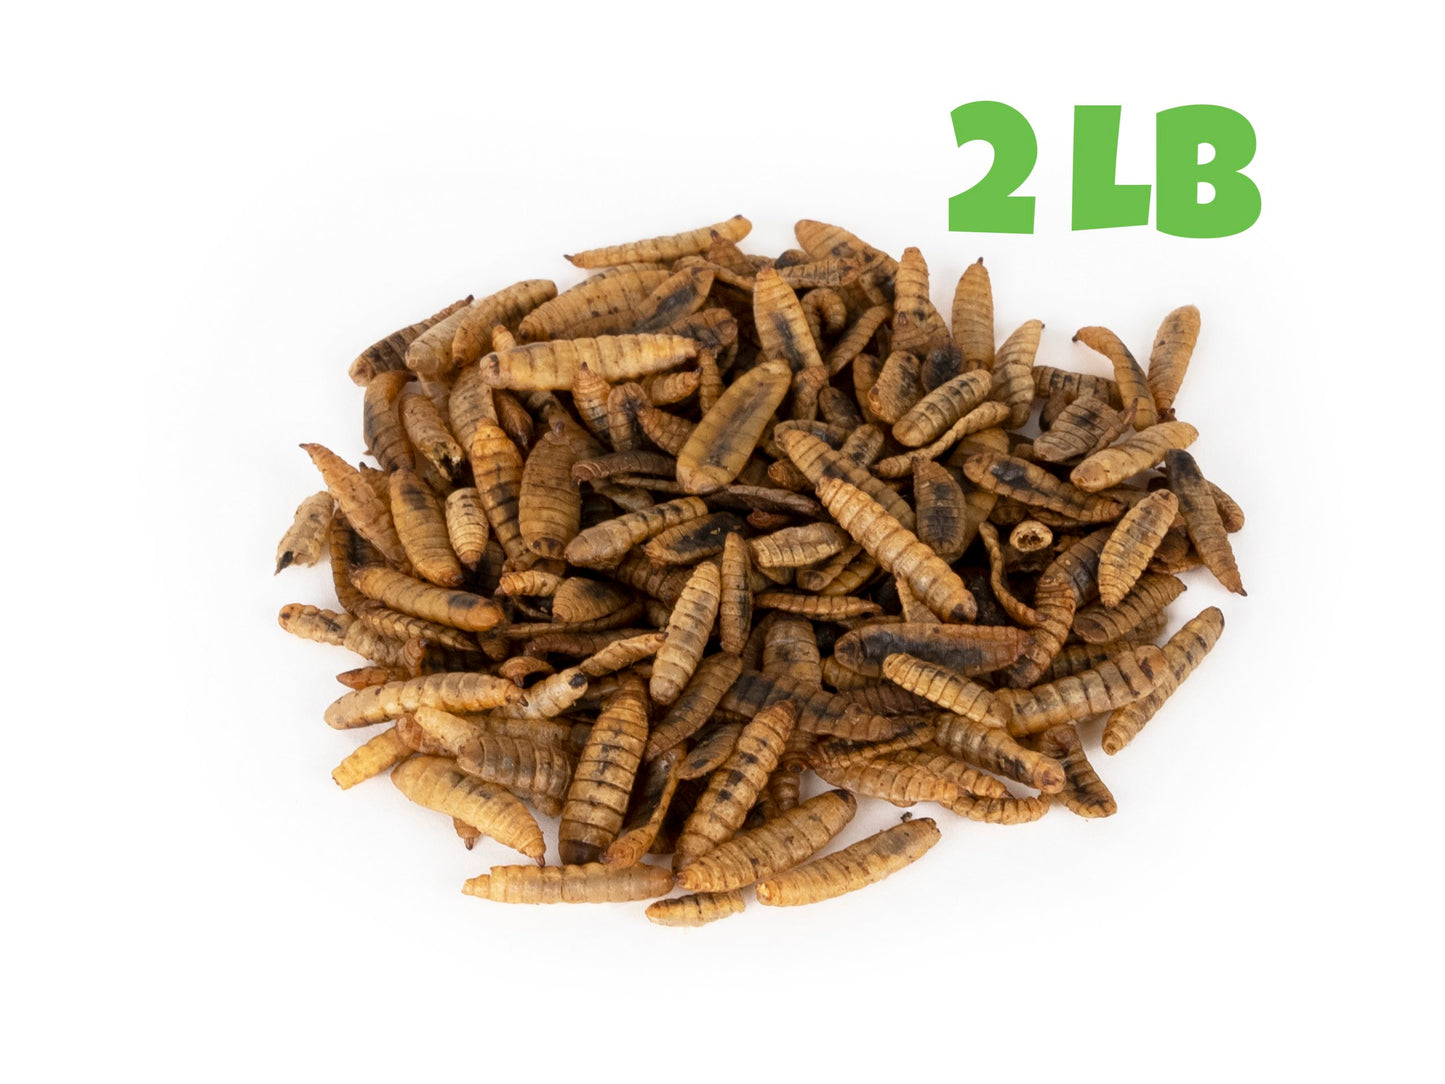 North American Dried Black Soldier Fly Larvae - 2 LB